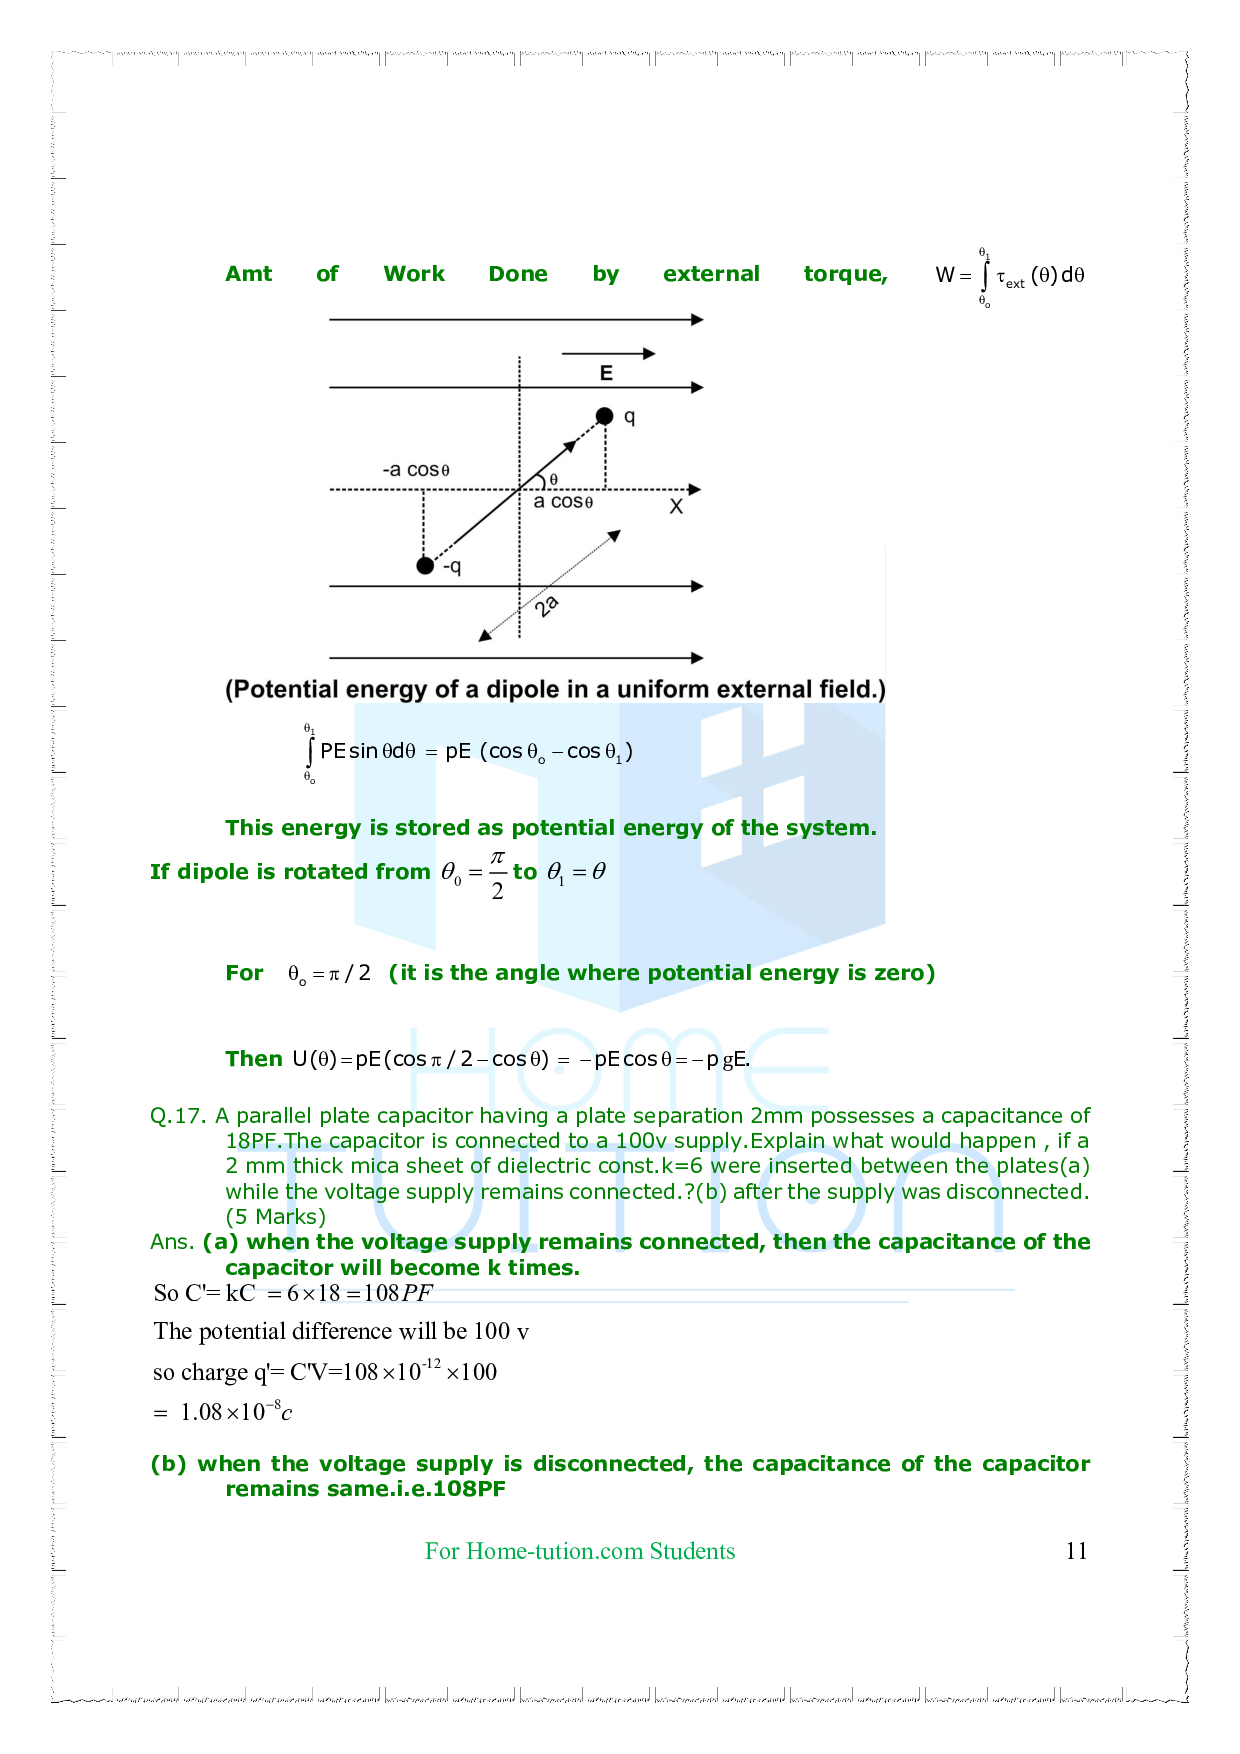 Chapter 2 Electrostatic Potential and Capacitance Questions